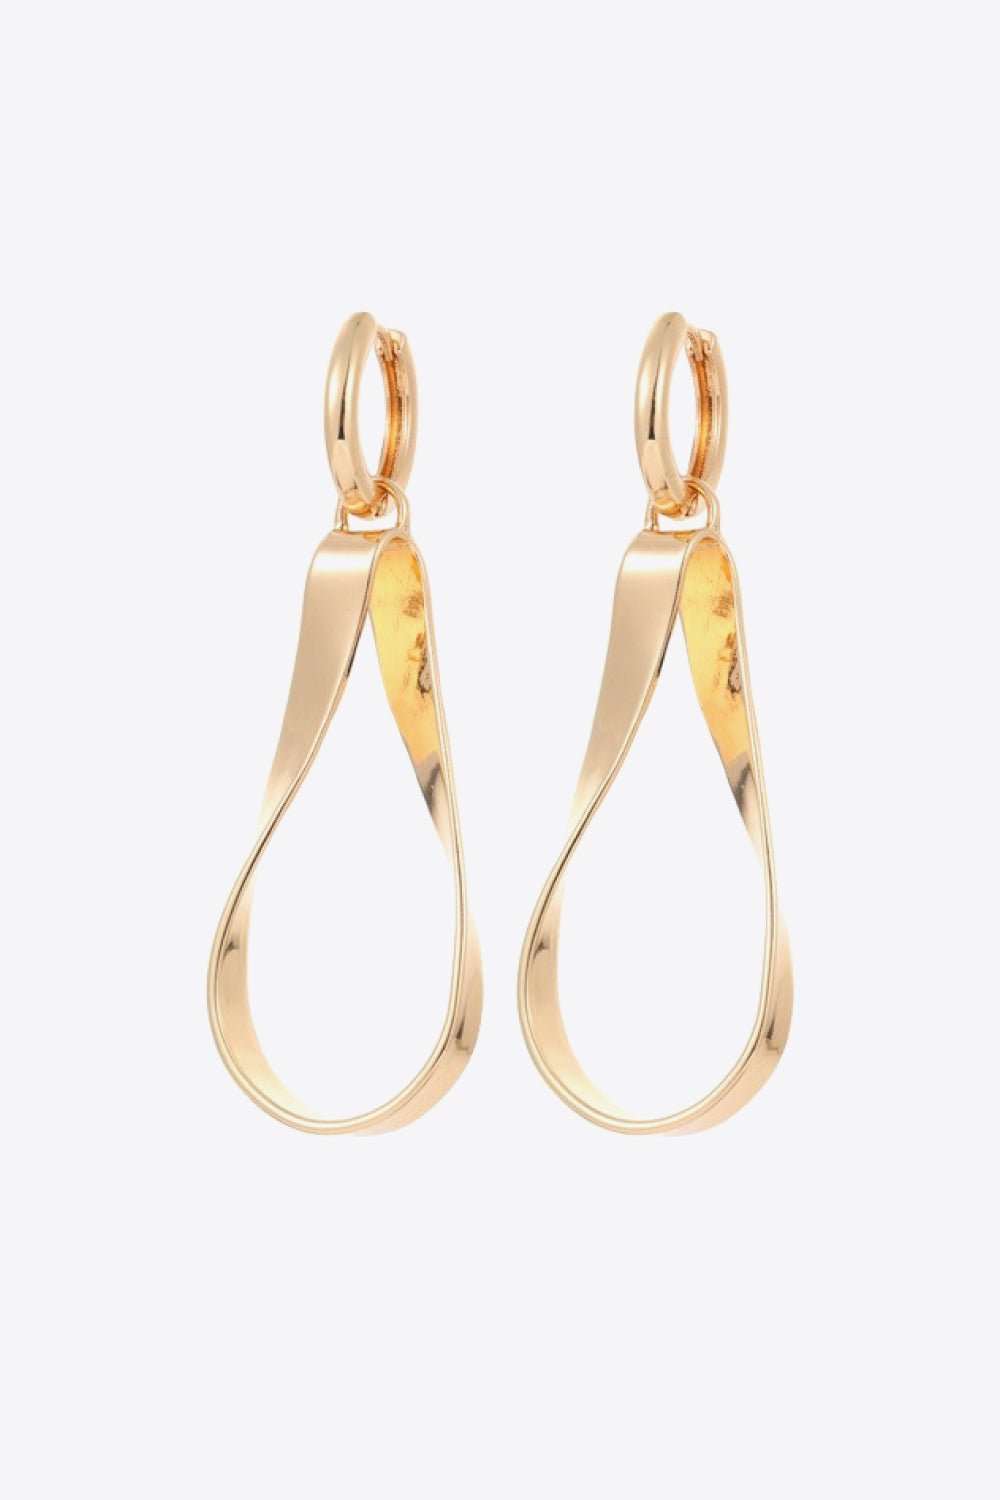 Alloy 18K Gold-Plated Earrings - London's Closet Boutique